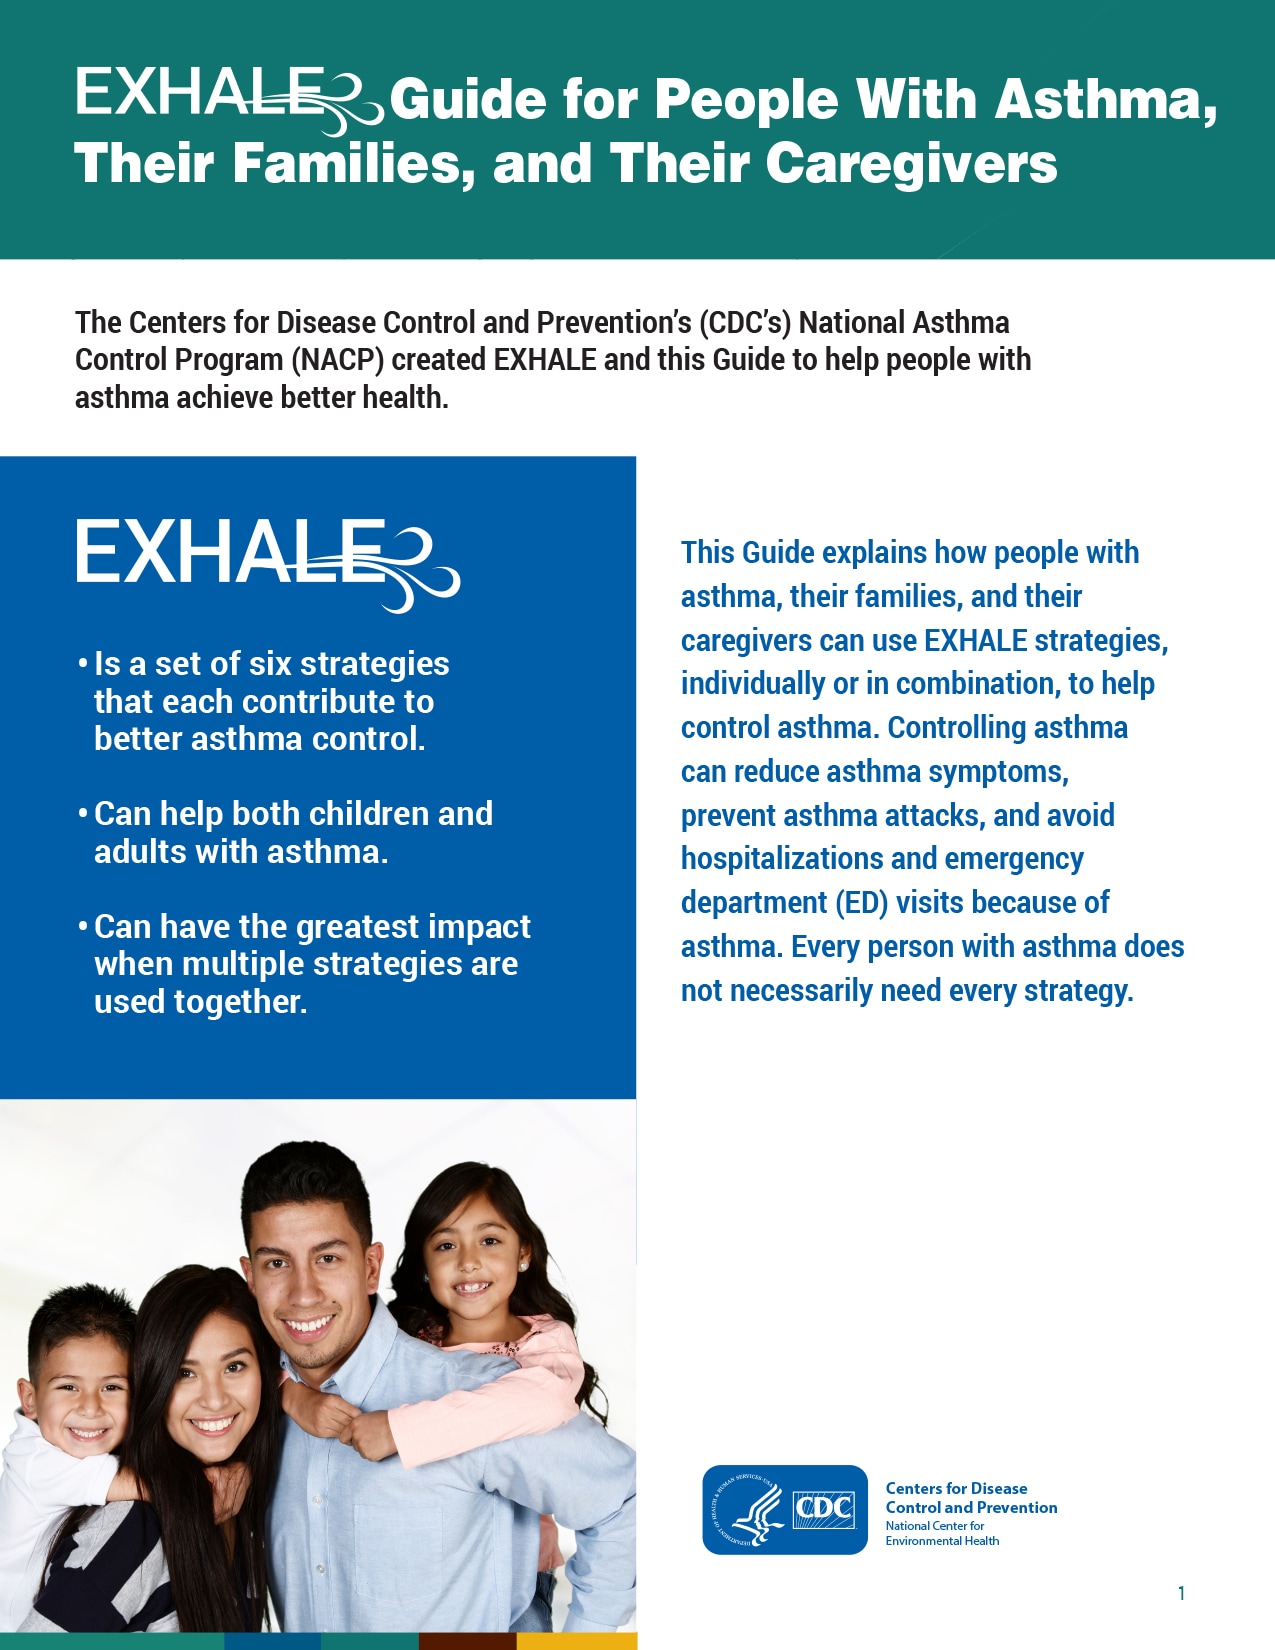 EXHALE Guide for People with Asthma, Their Families, and Their Caregivers